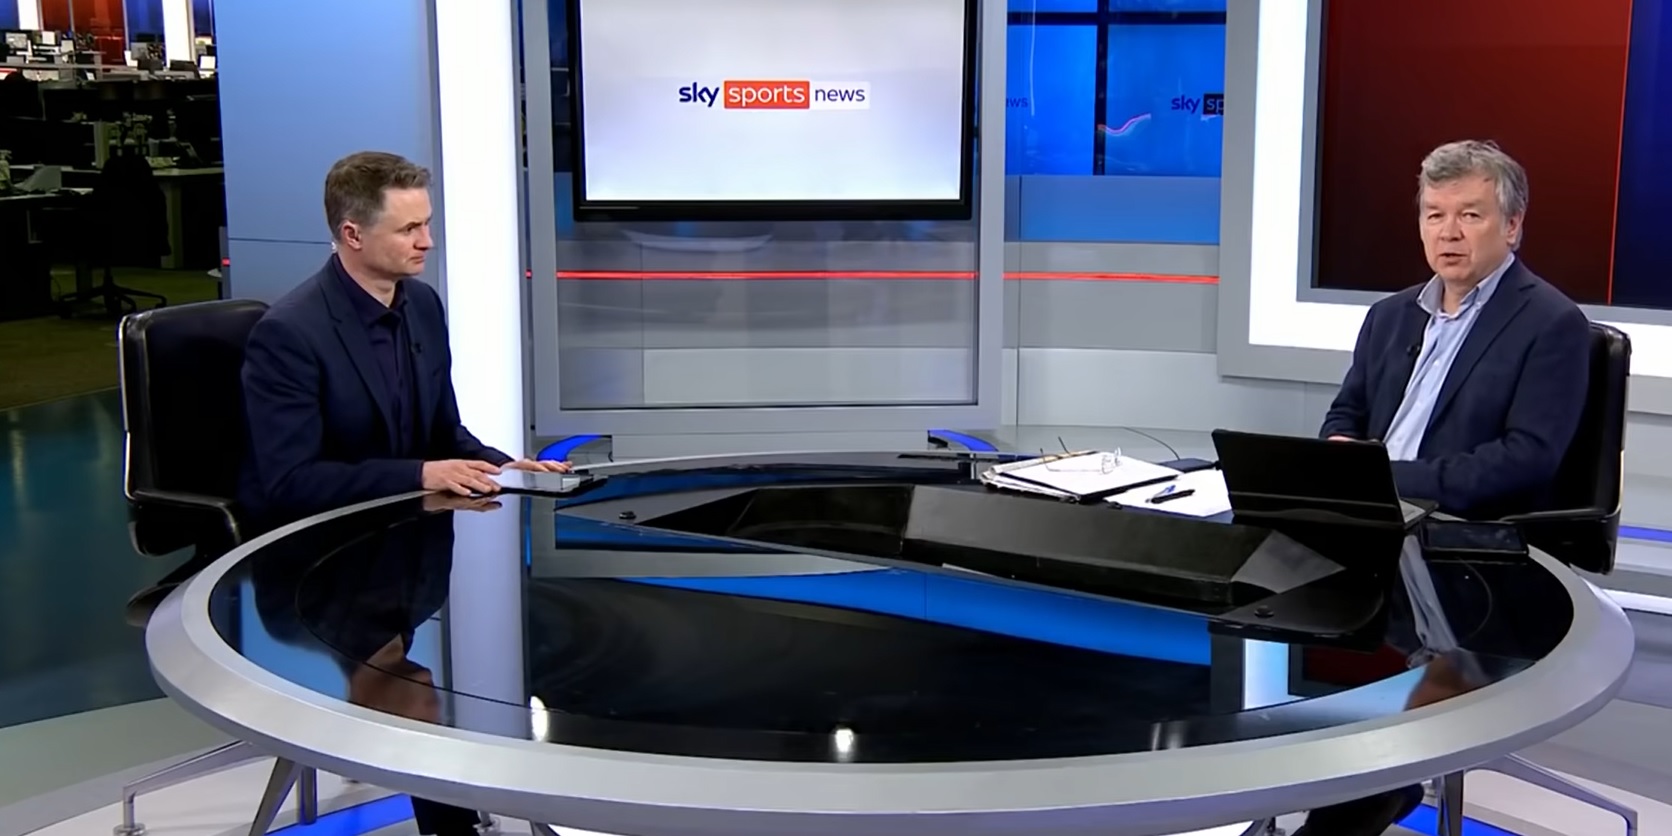 Senior Sky Sports journalist weighs in on PL Big Six discussions as European Super League threat looms